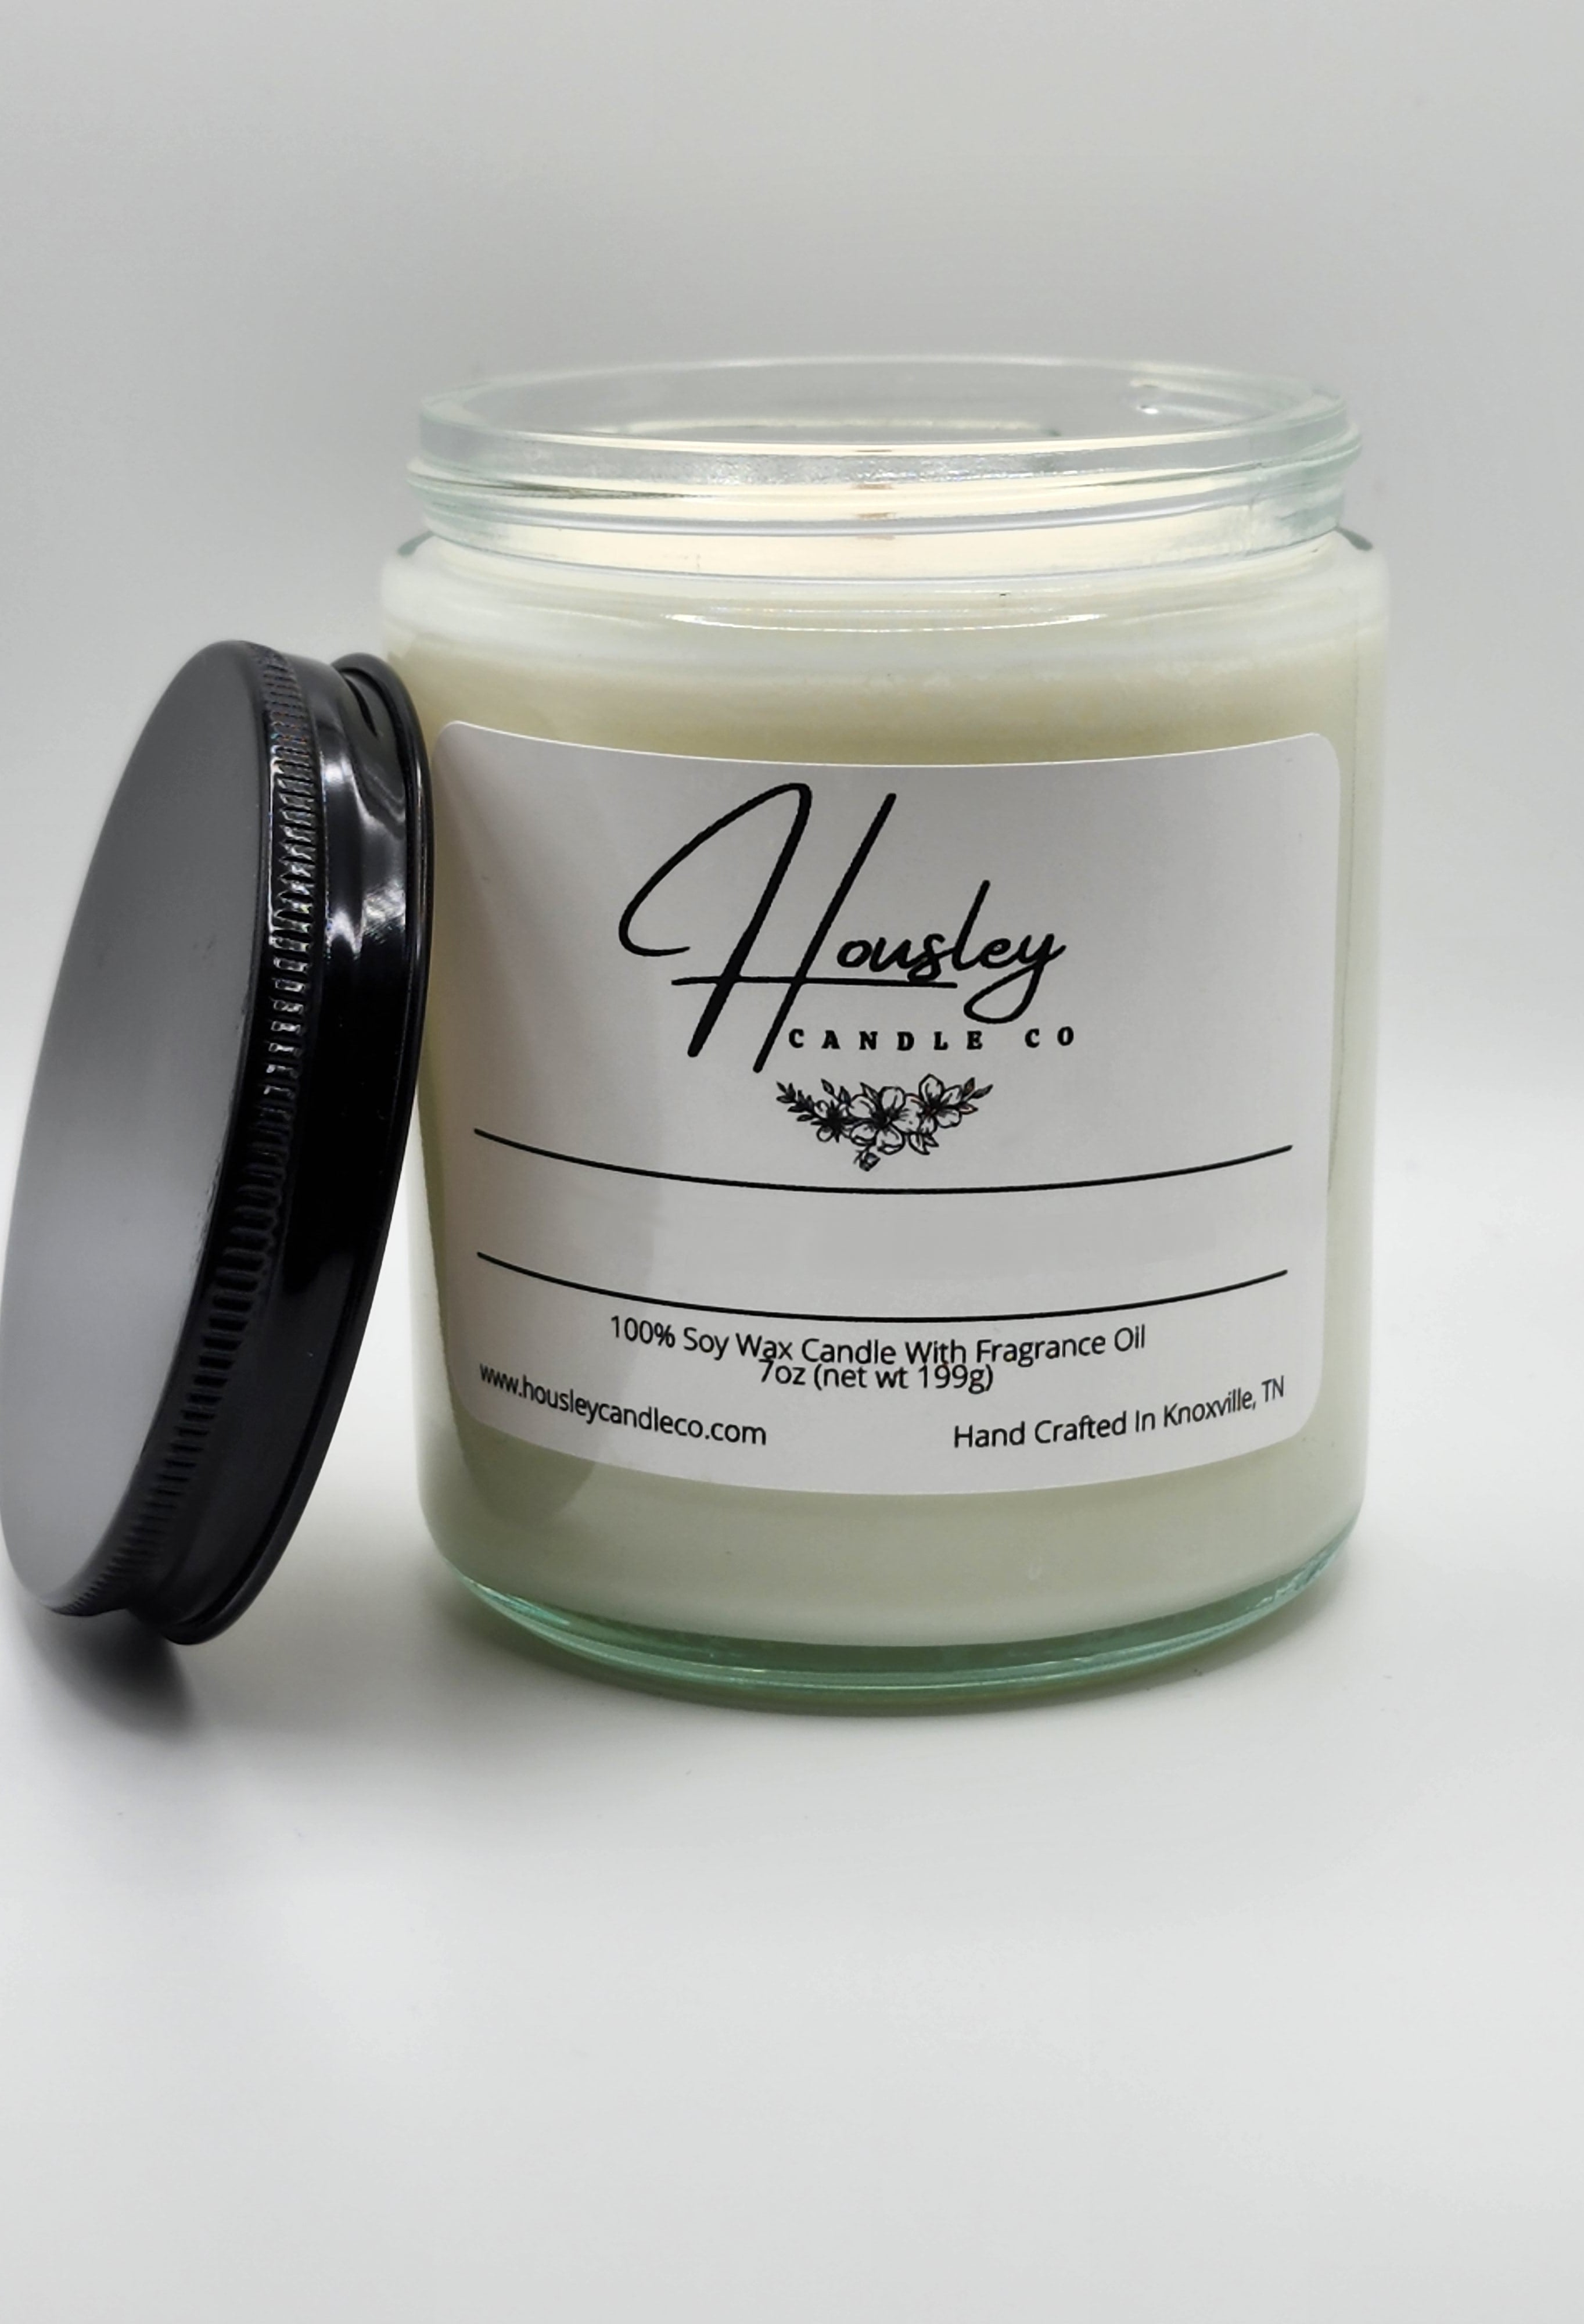 Toasted Marshmallow Soy Wax Candle Scent: Ozone, Marshmallow, Smoke 